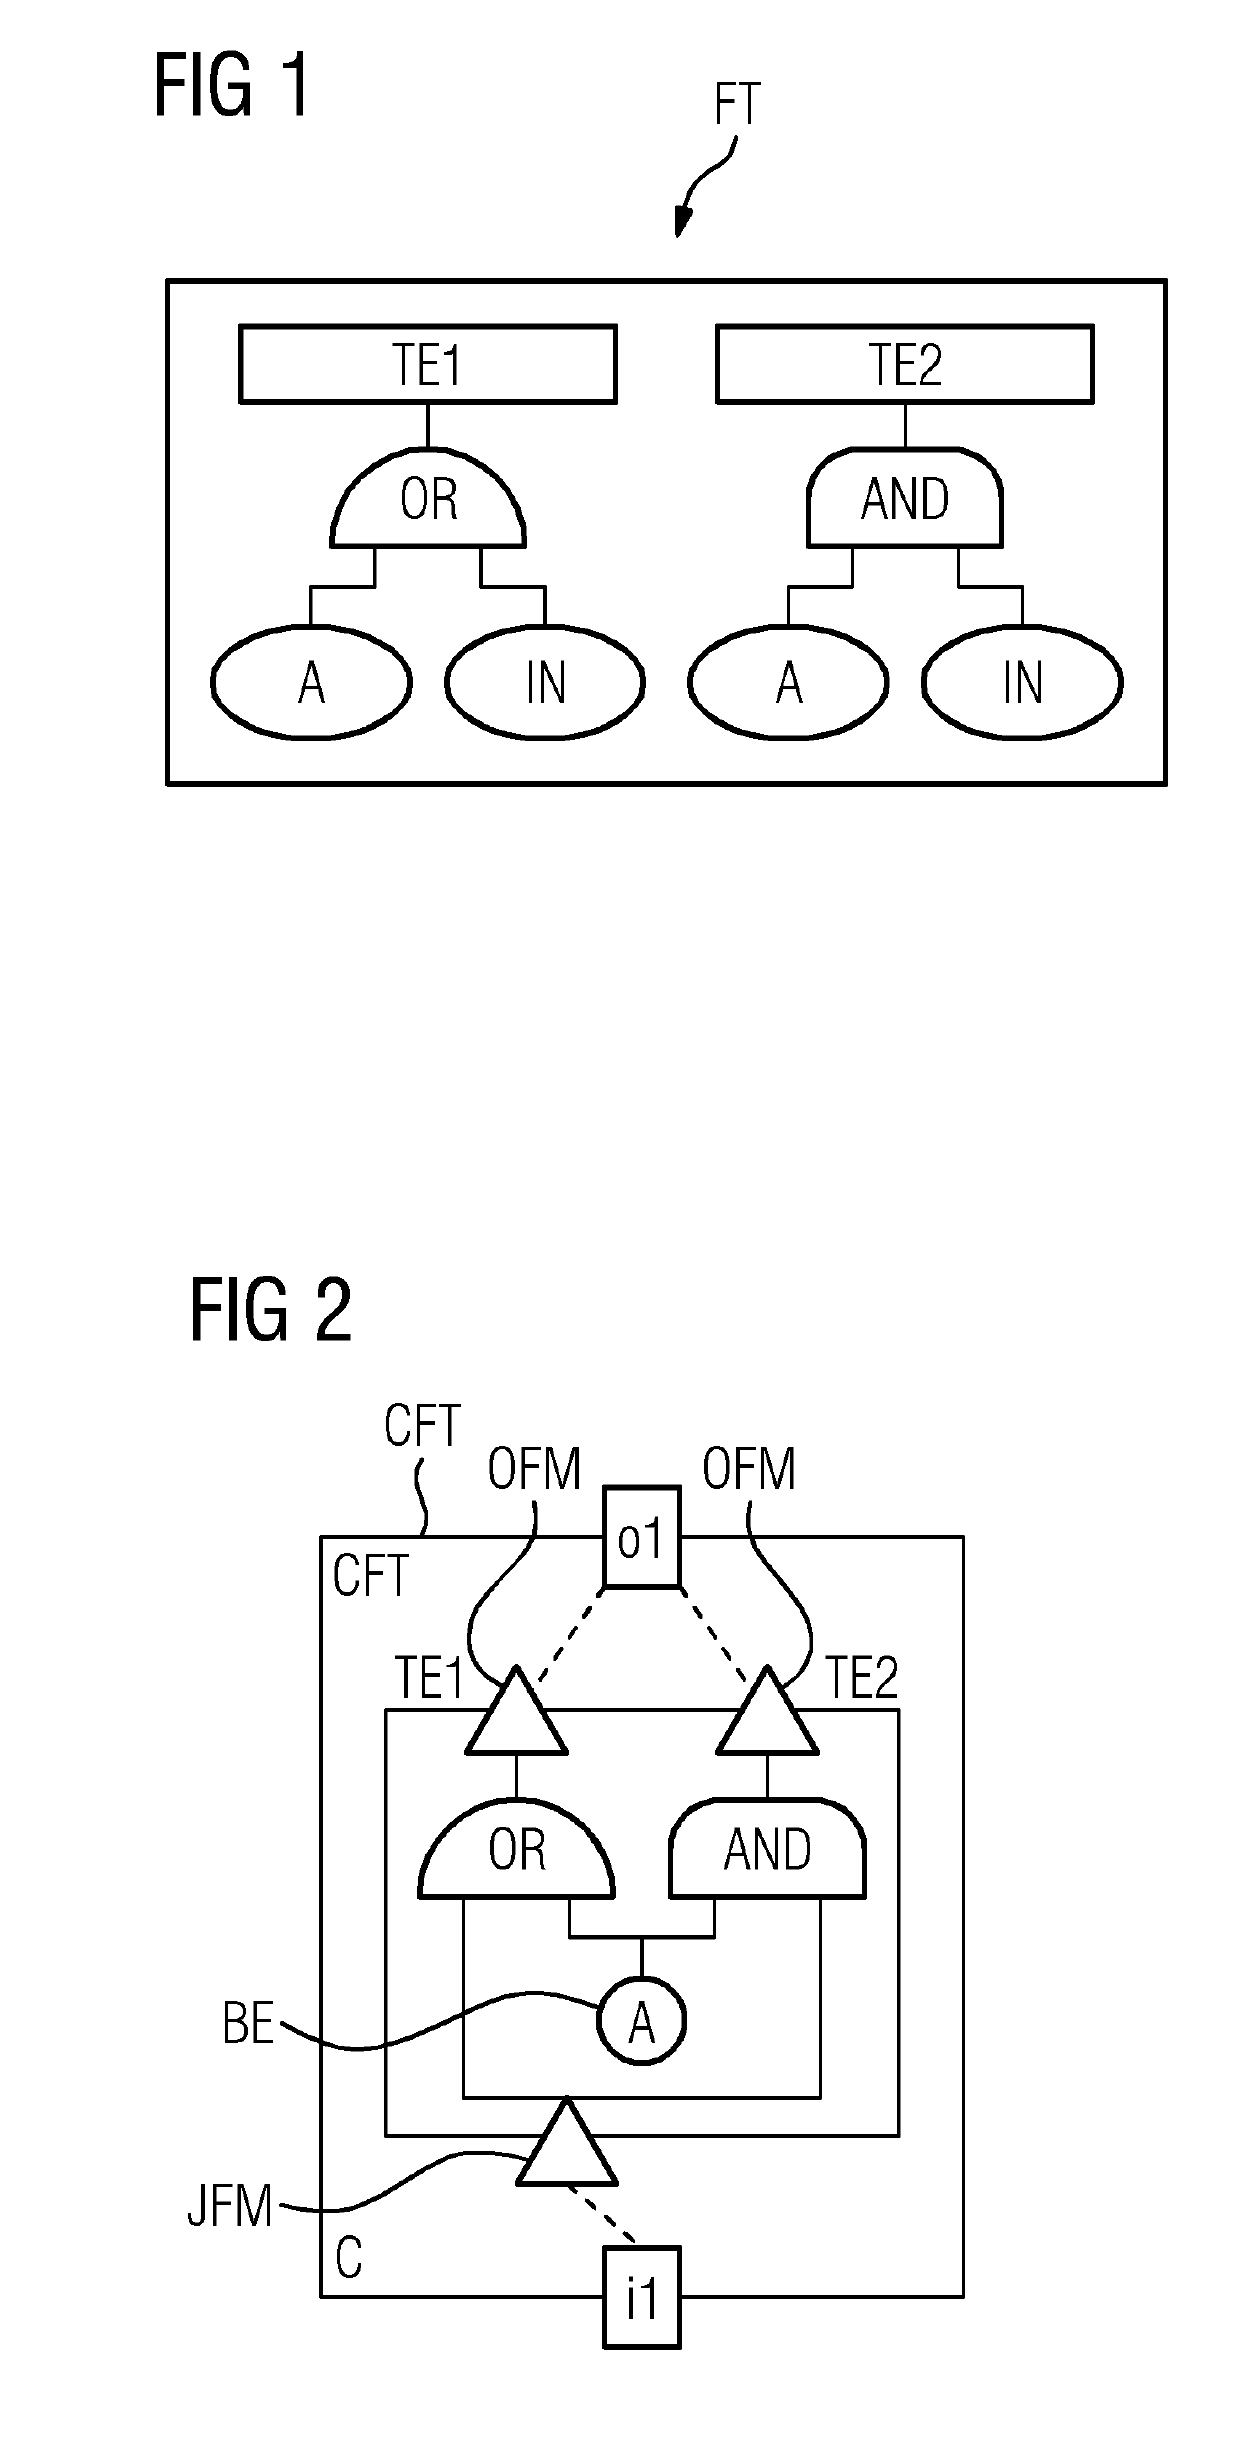 Method for analyzing a physical system architecture of a safety-critical system